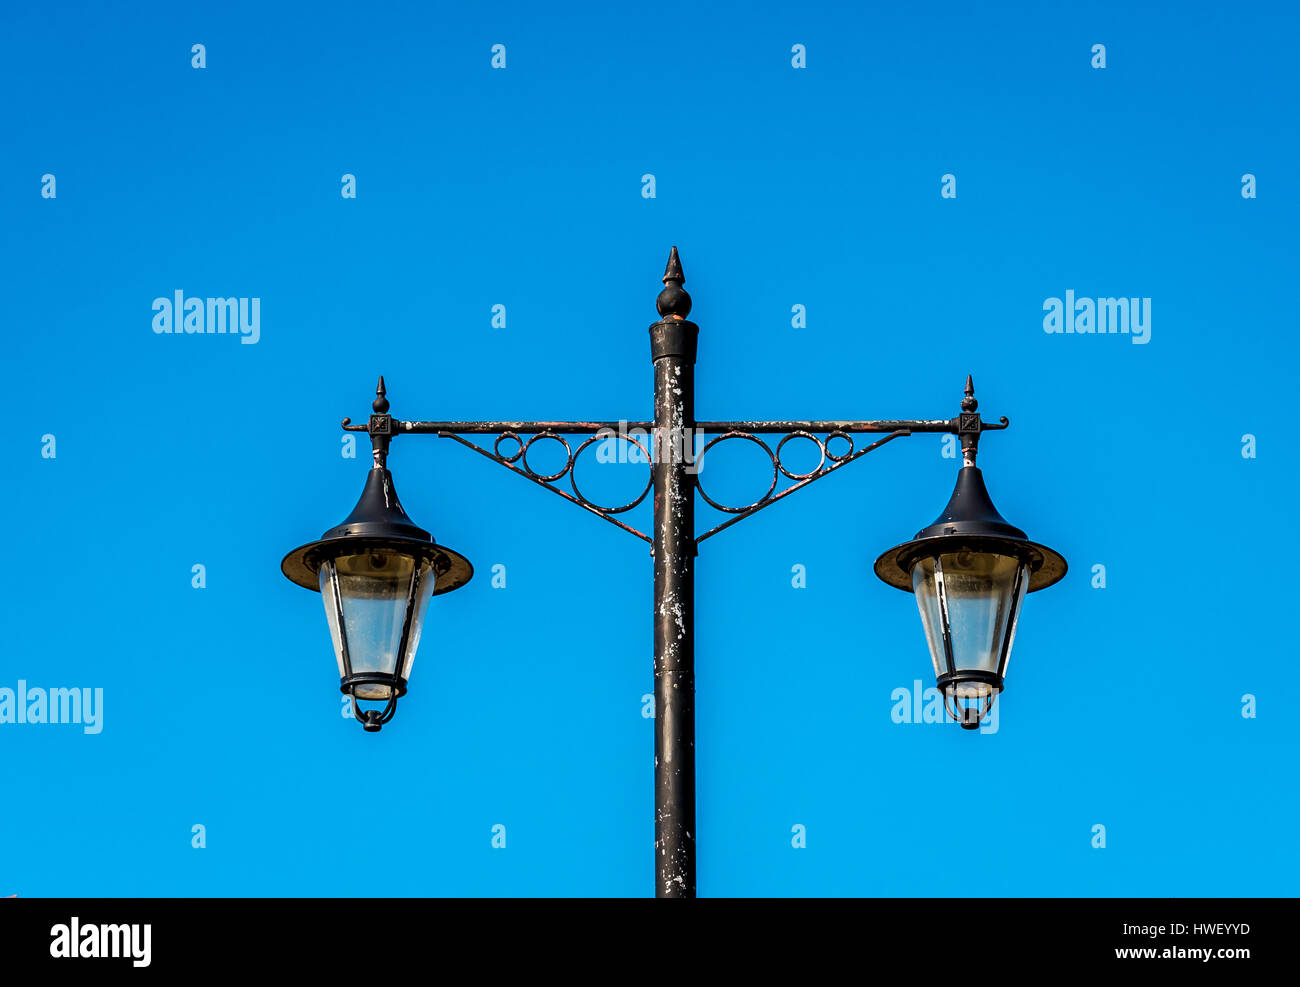 Old fashioned Victorian street lights centred against clear blue sky, Haddington, East Lothi, Scotland, UK Stock Photo